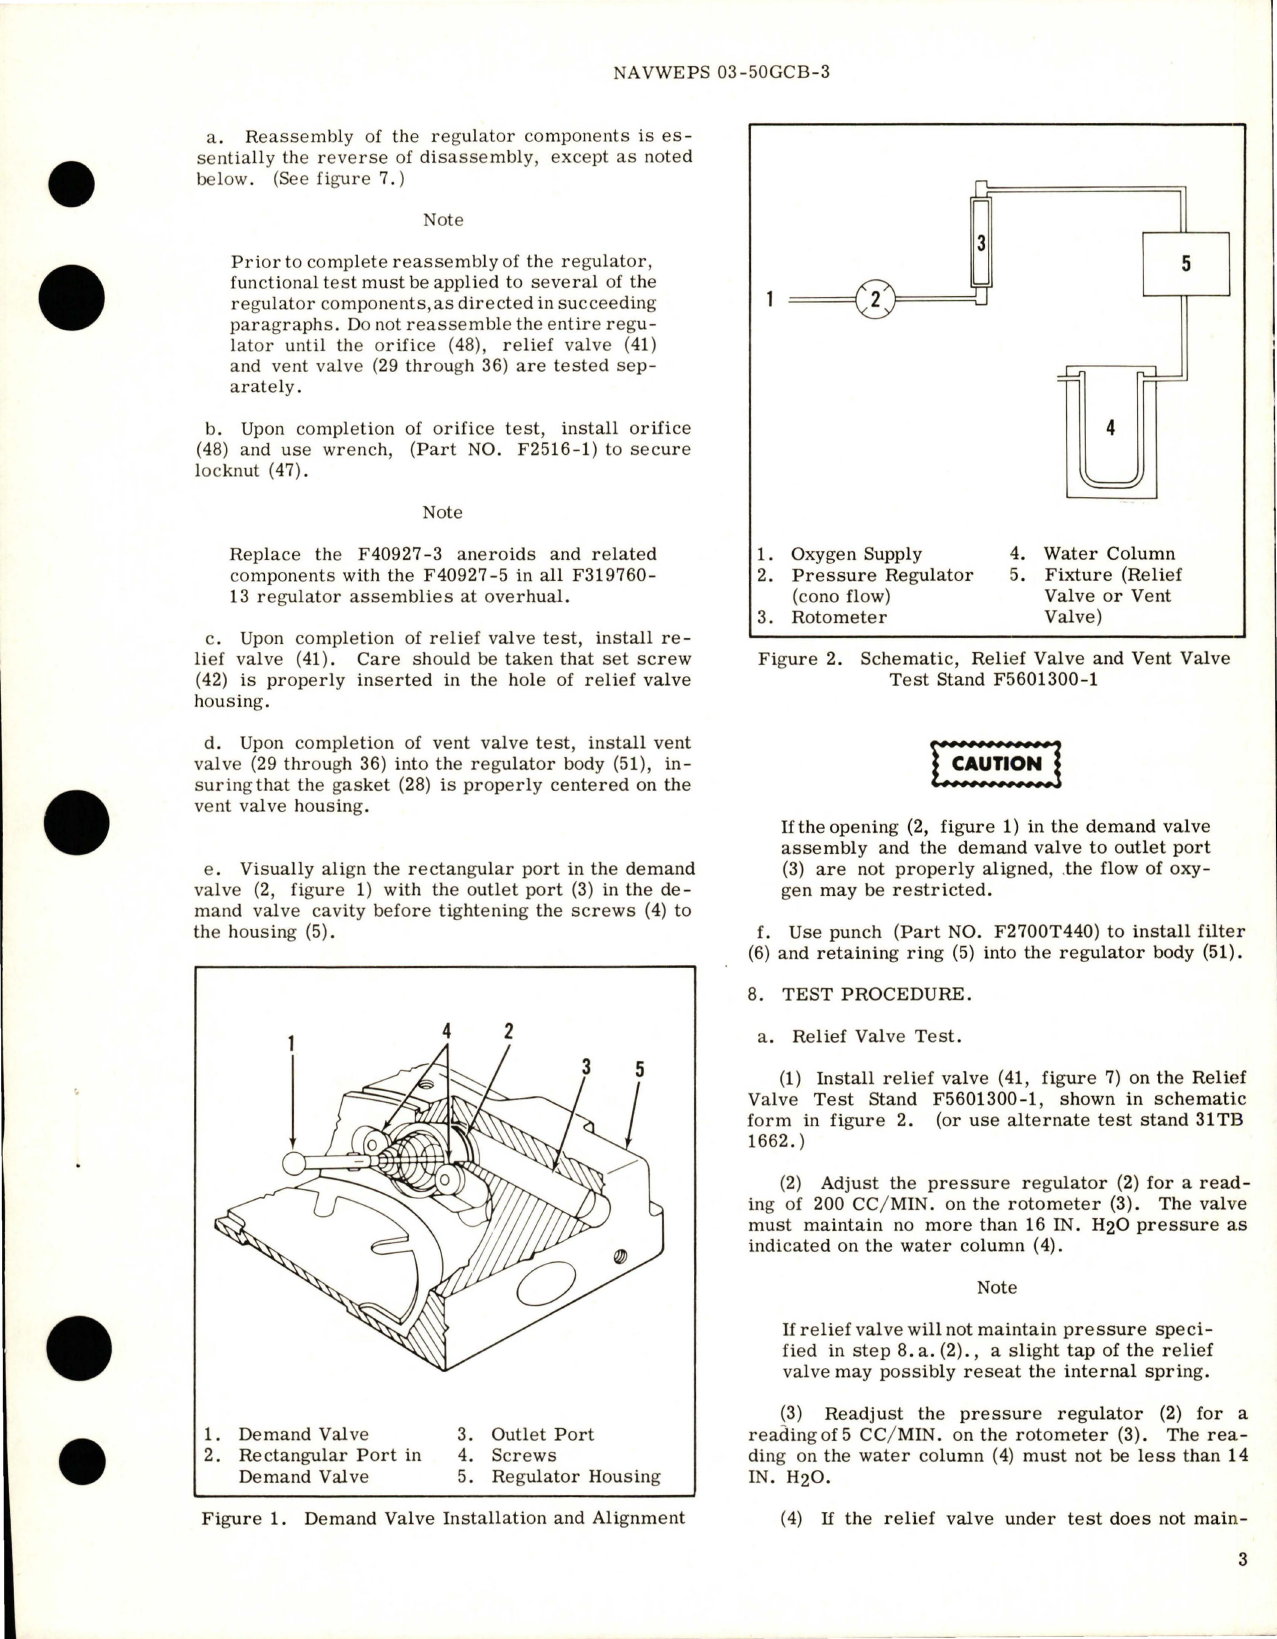 Sample page 5 from AirCorps Library document: Overhaul Instructions with Parts Breakdown for Automatic Pressure Breathing Regulator - Parts F319760-13 and F319760-15